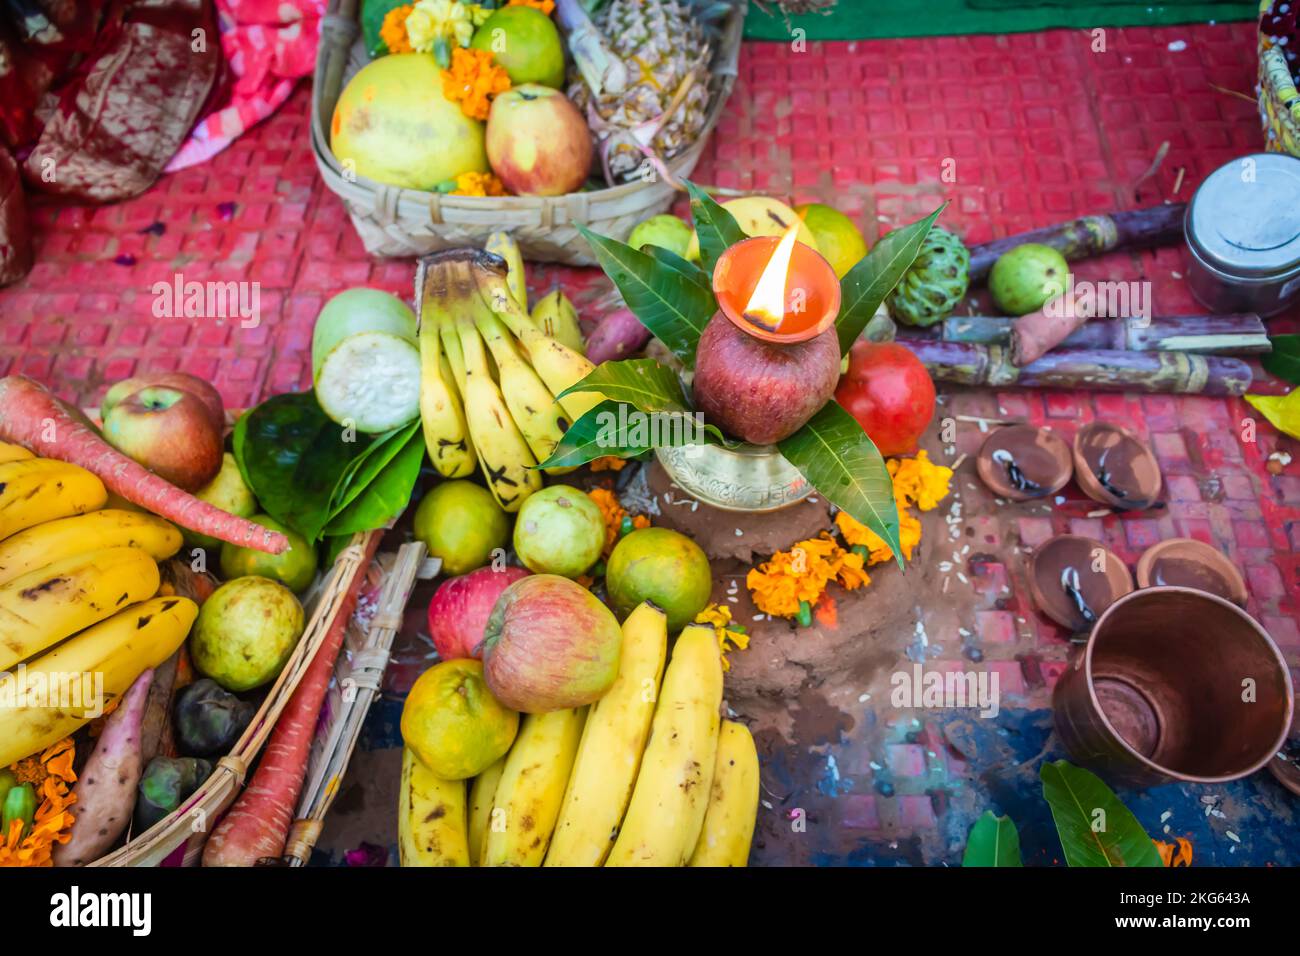 Hindu religious offerings for sun god during Chhath festival from different angle Stock Photo